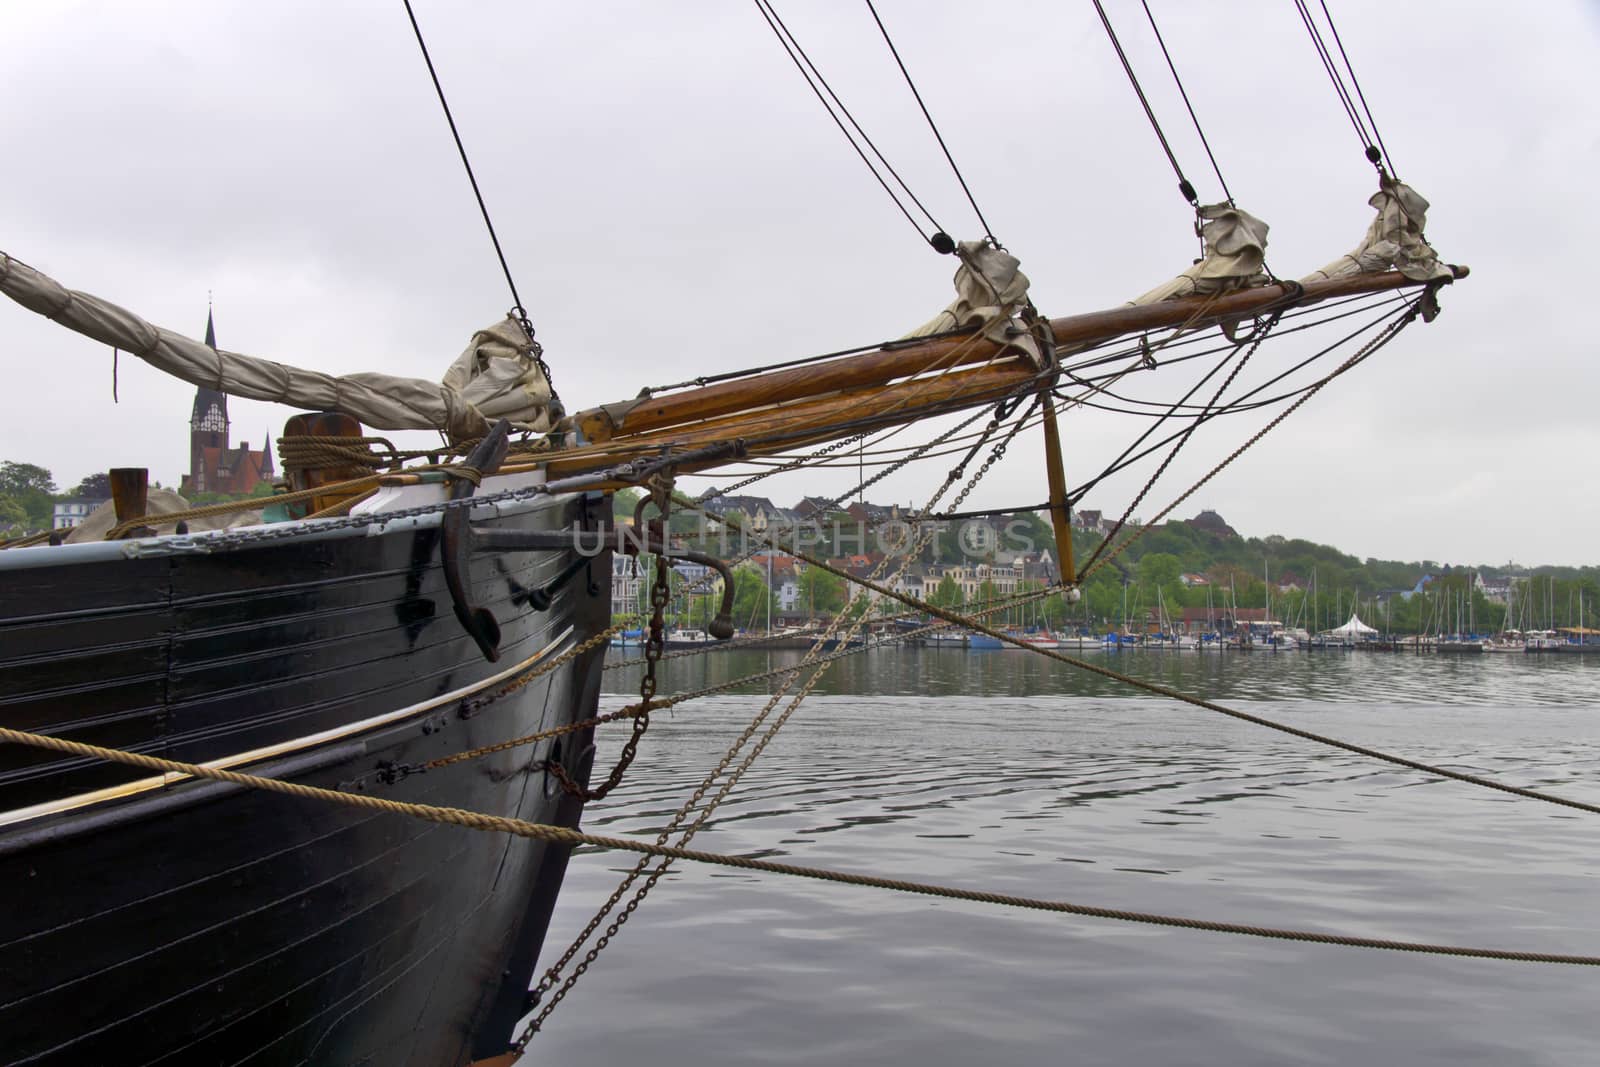 An old sailing ship anchored in the Flensburg Fjord, North Germany.